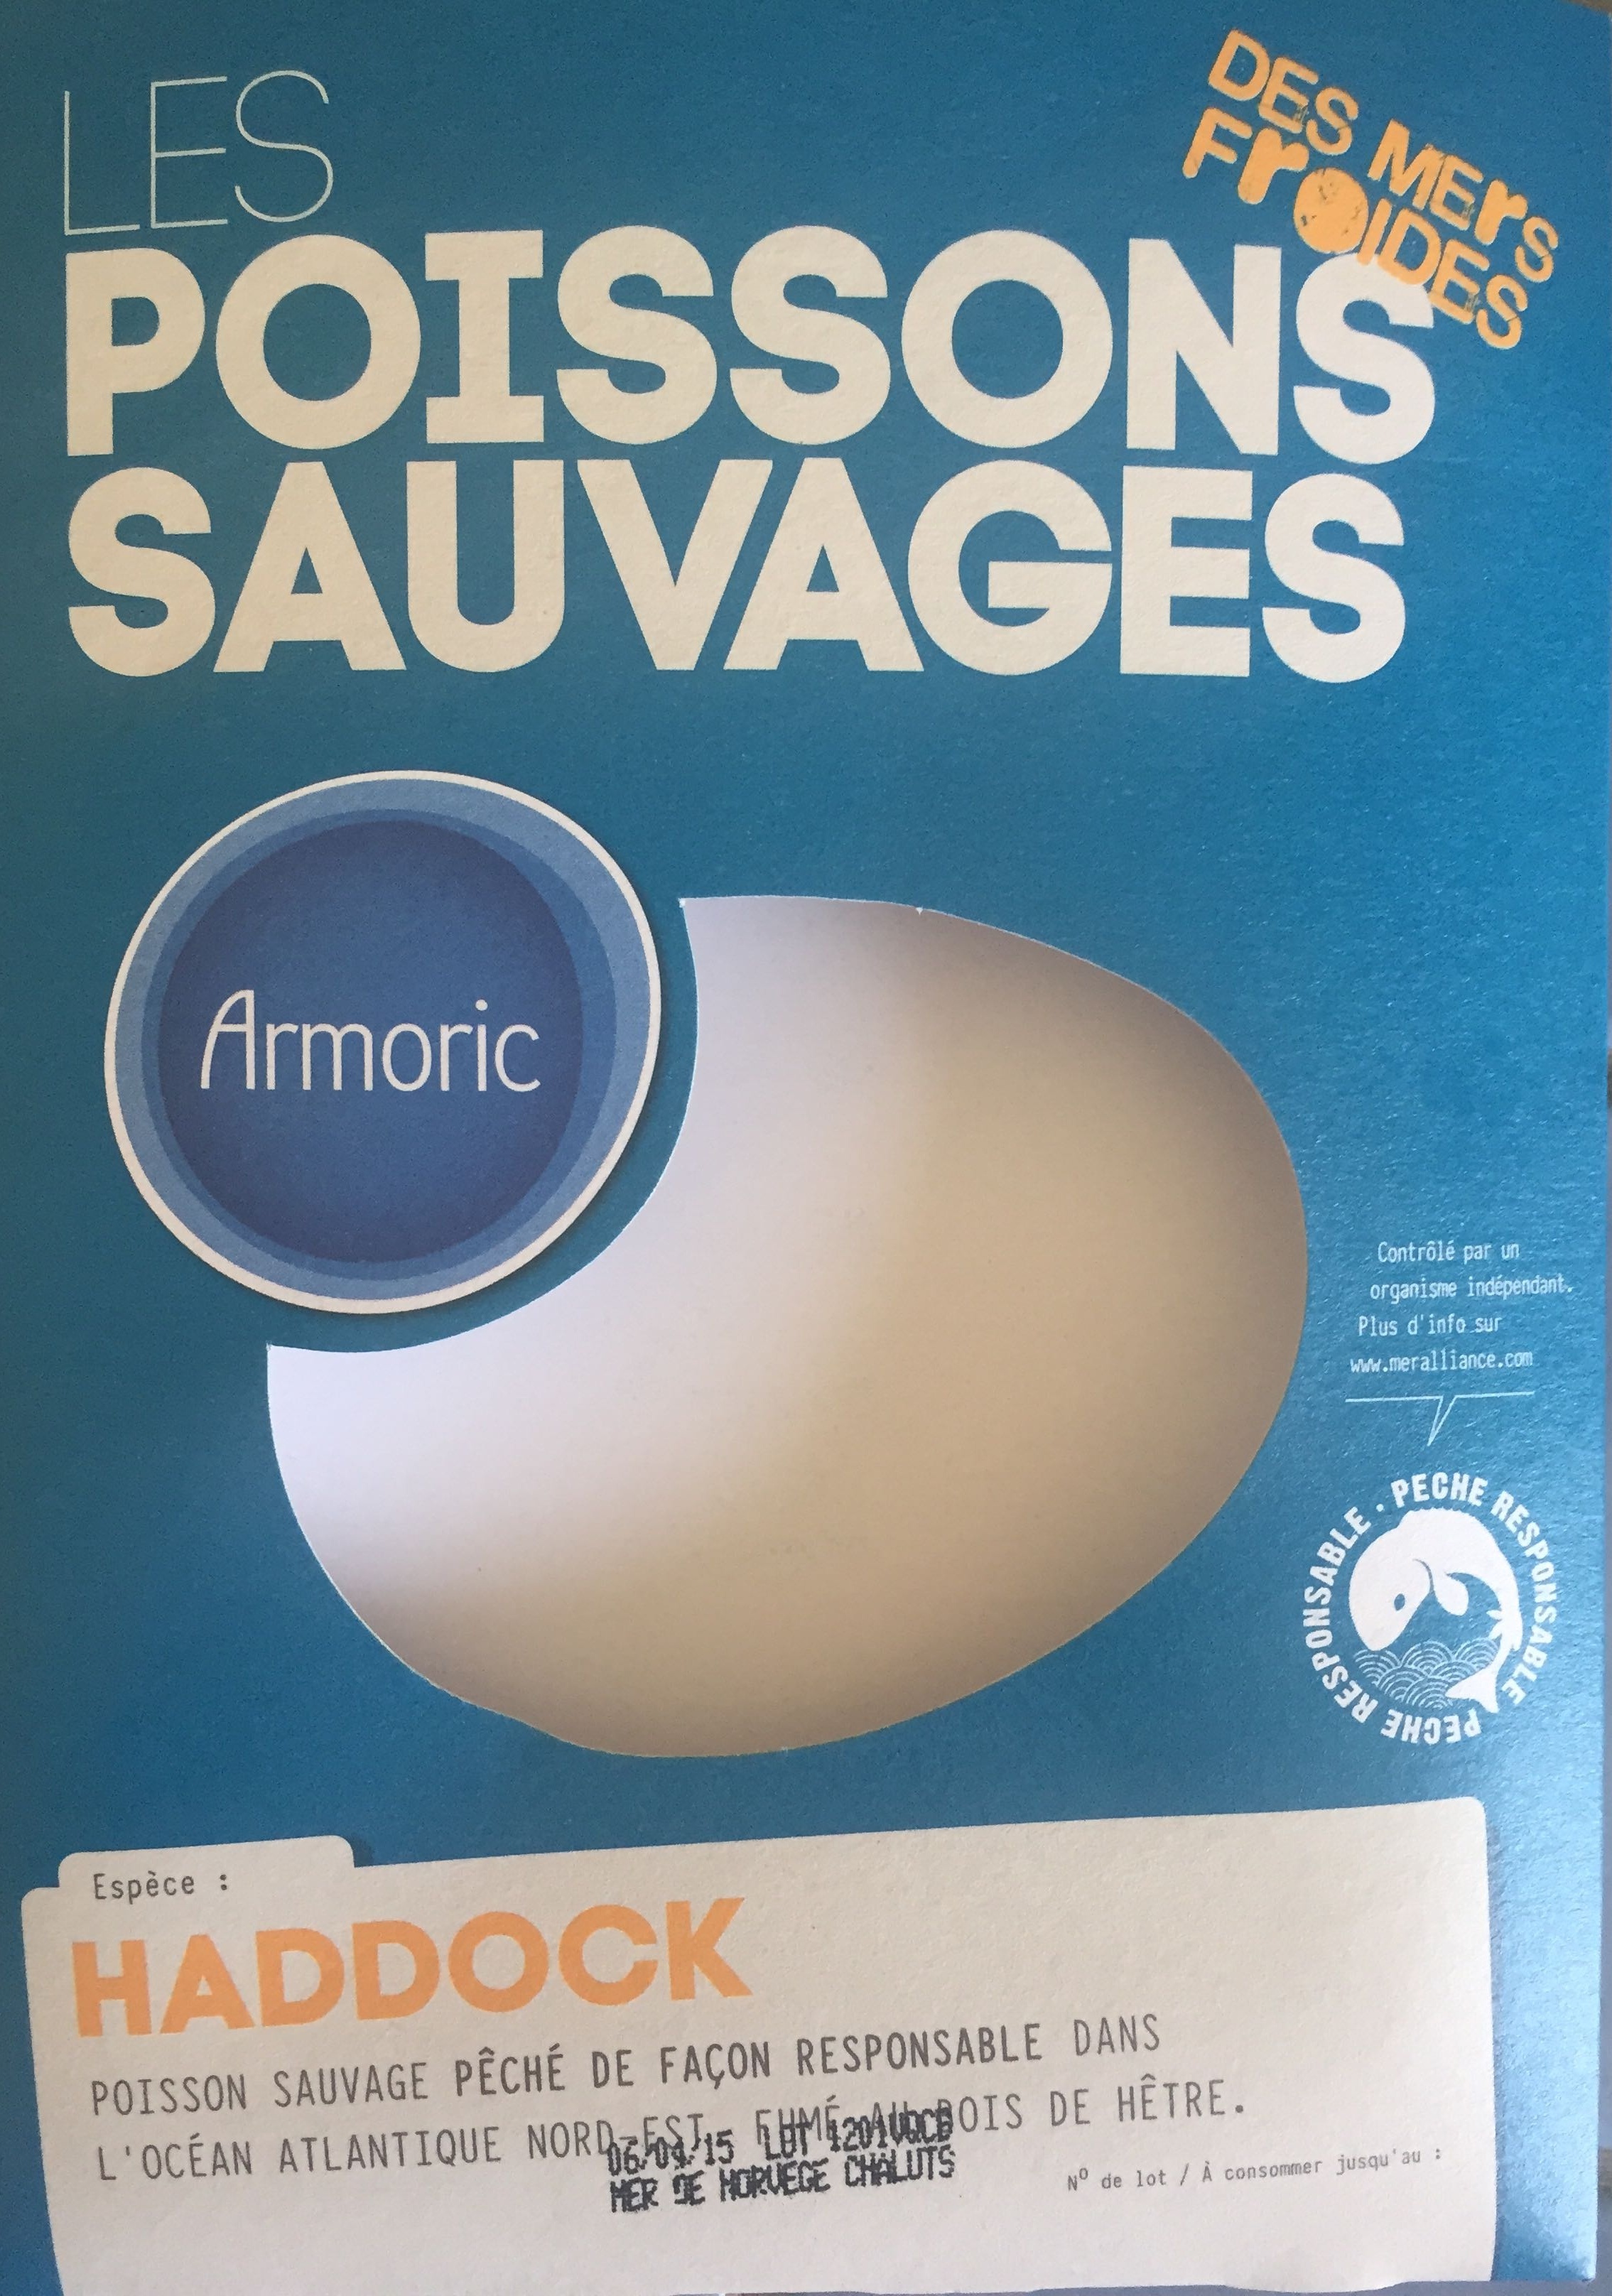 Les Poissons Sauvages - Le Haddock - Product - fr